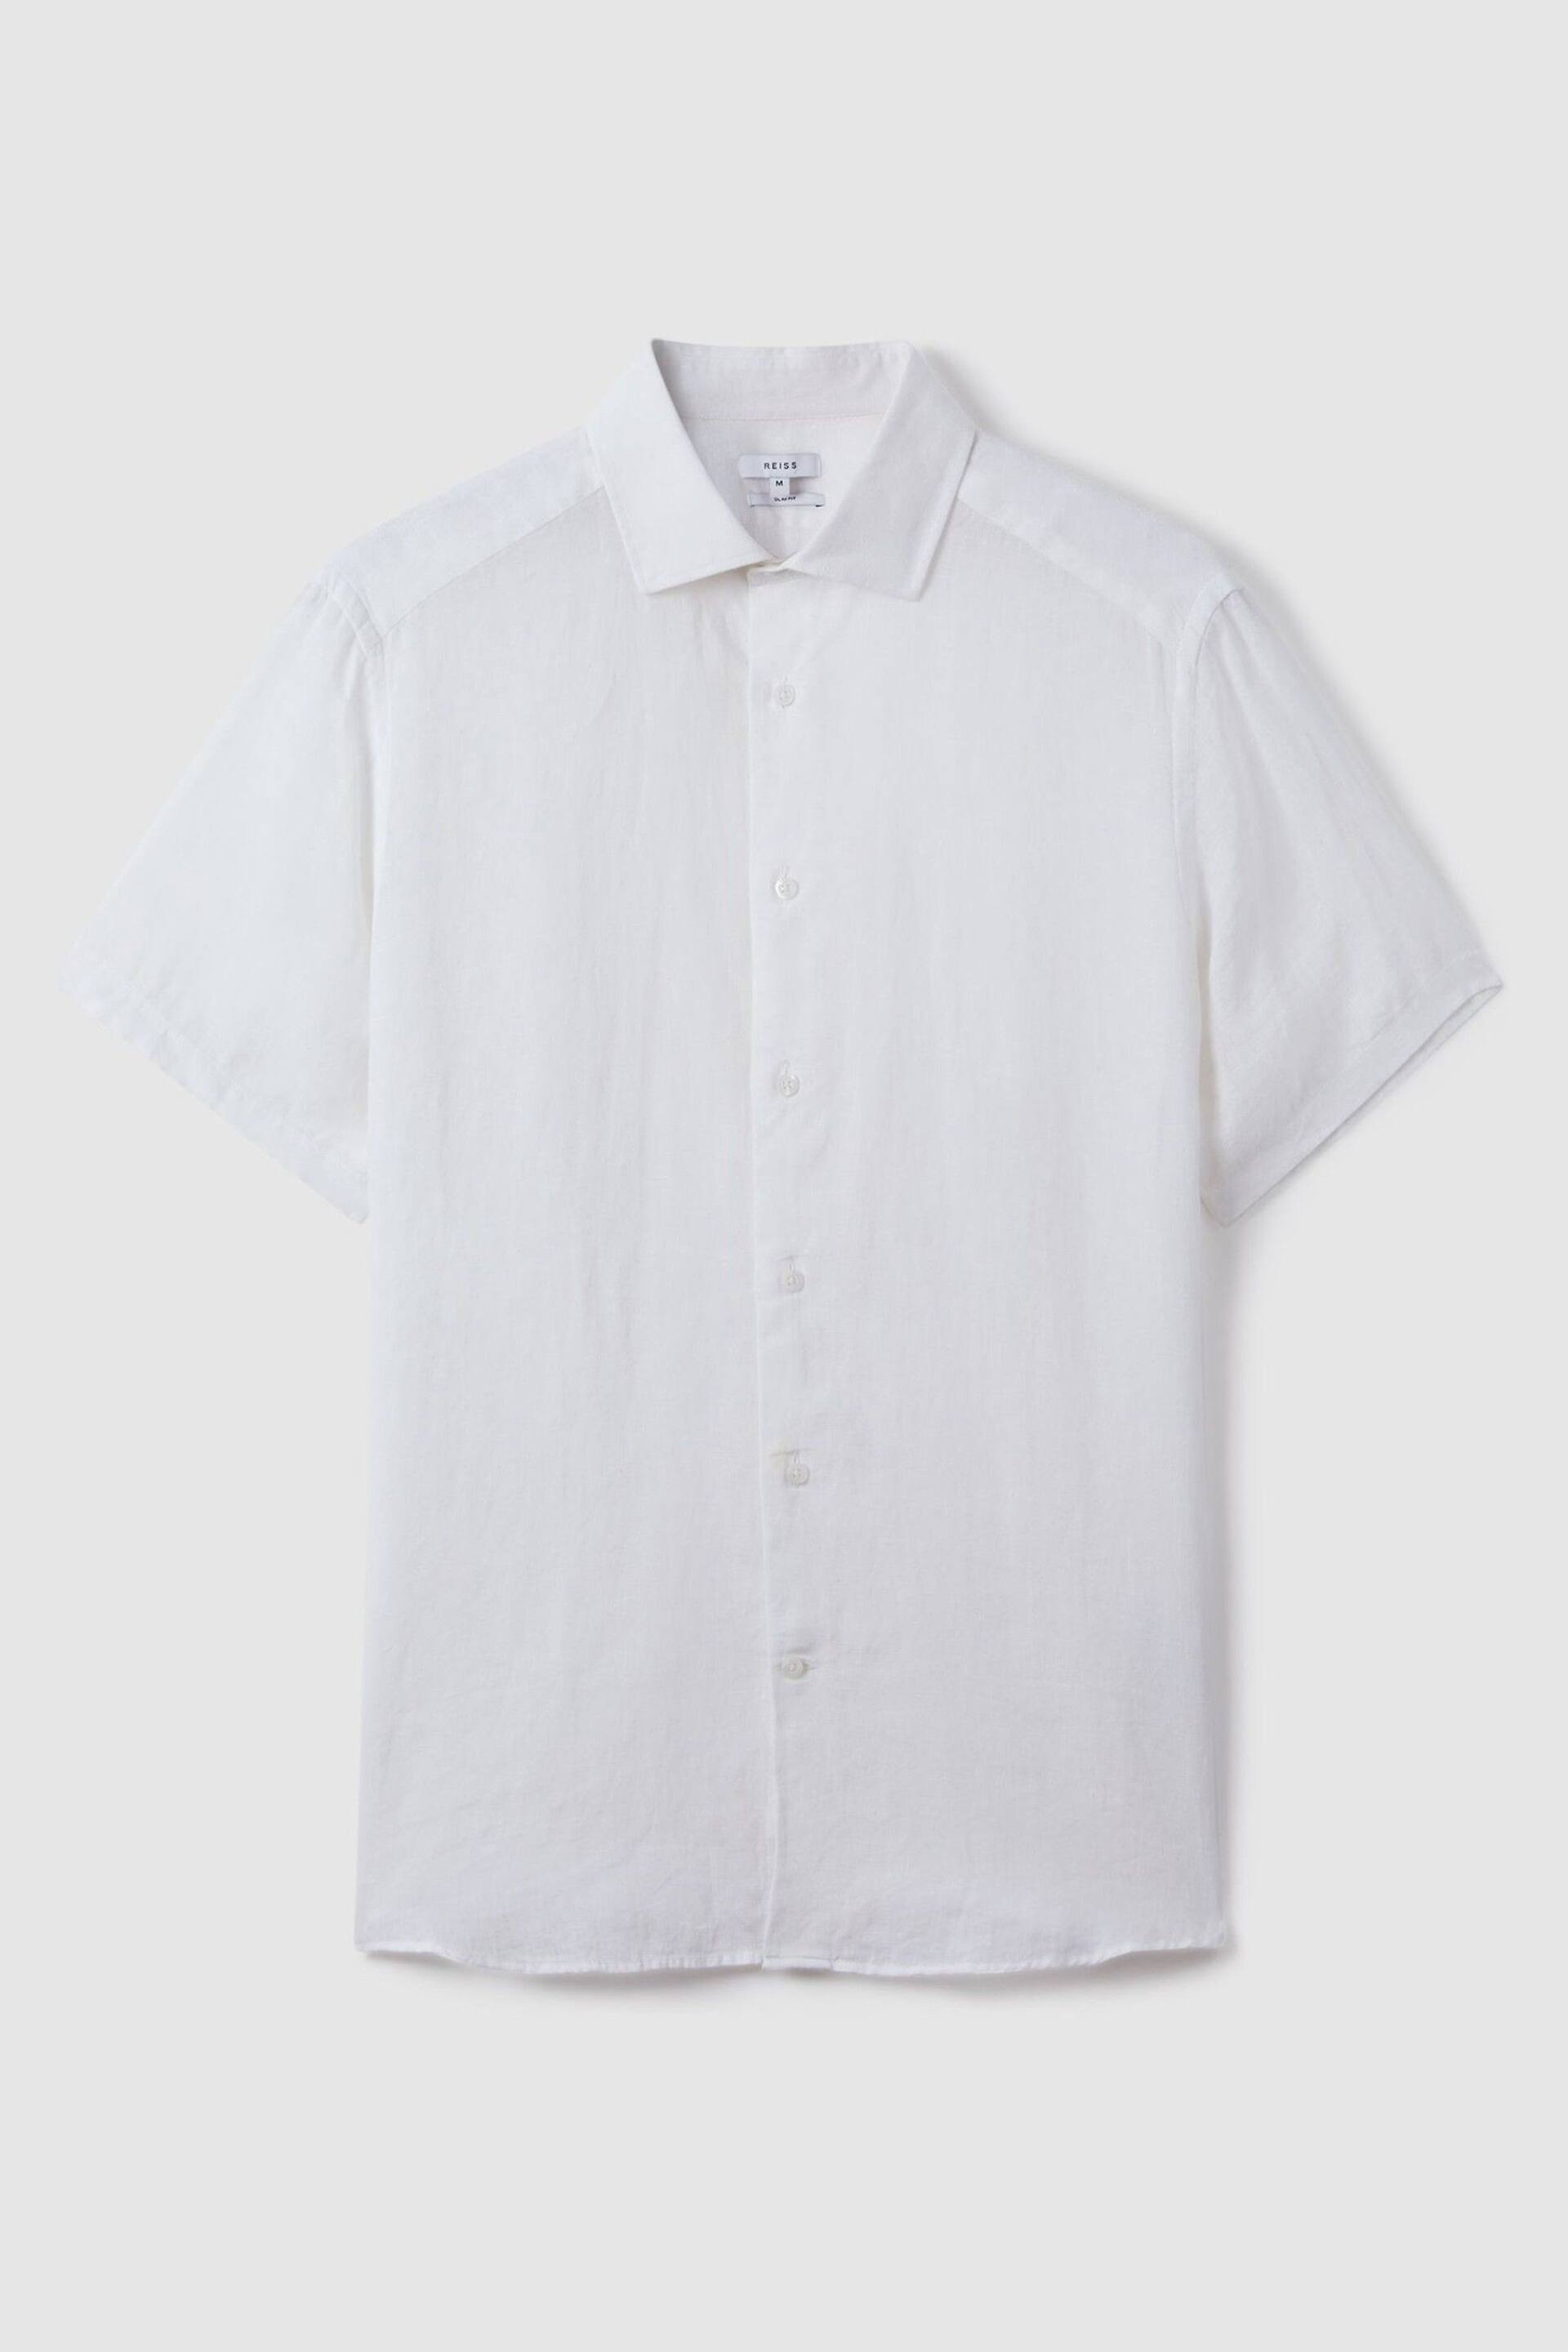 Reiss White Holiday Slim Fit Linen Button-Through Shirt - Image 2 of 6